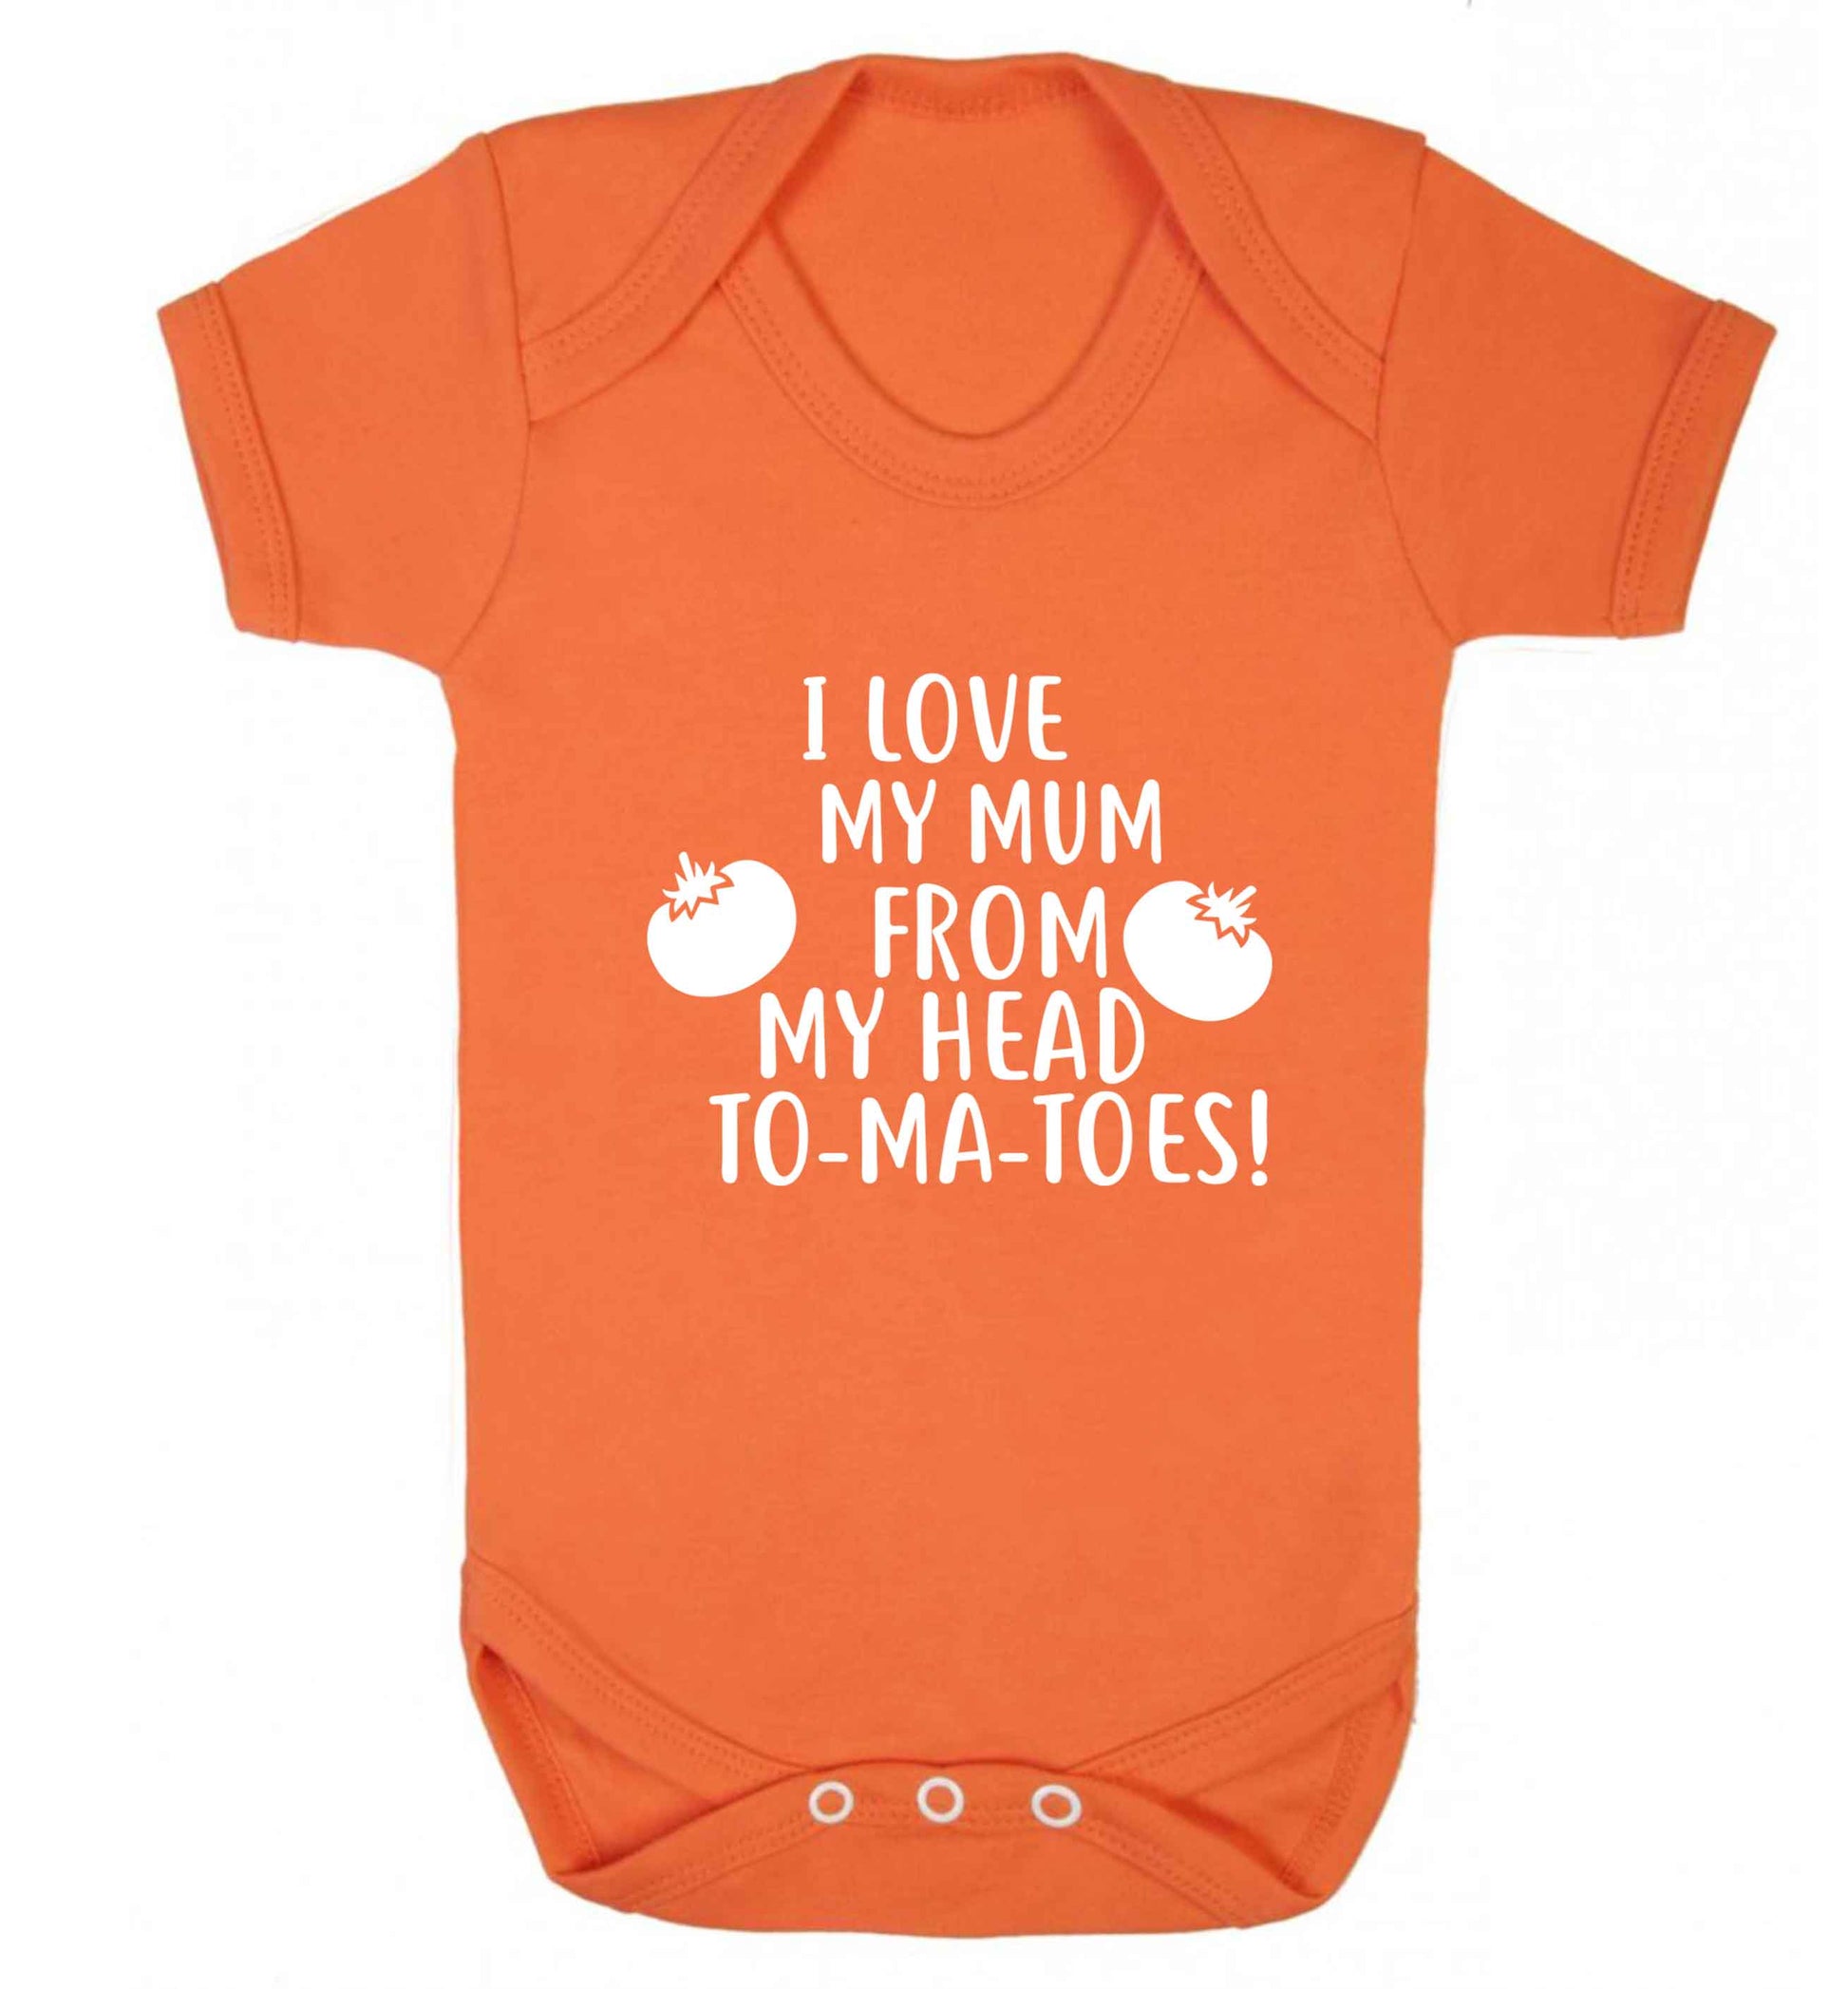 I love my mum from my head to-my-toes! baby vest orange 18-24 months